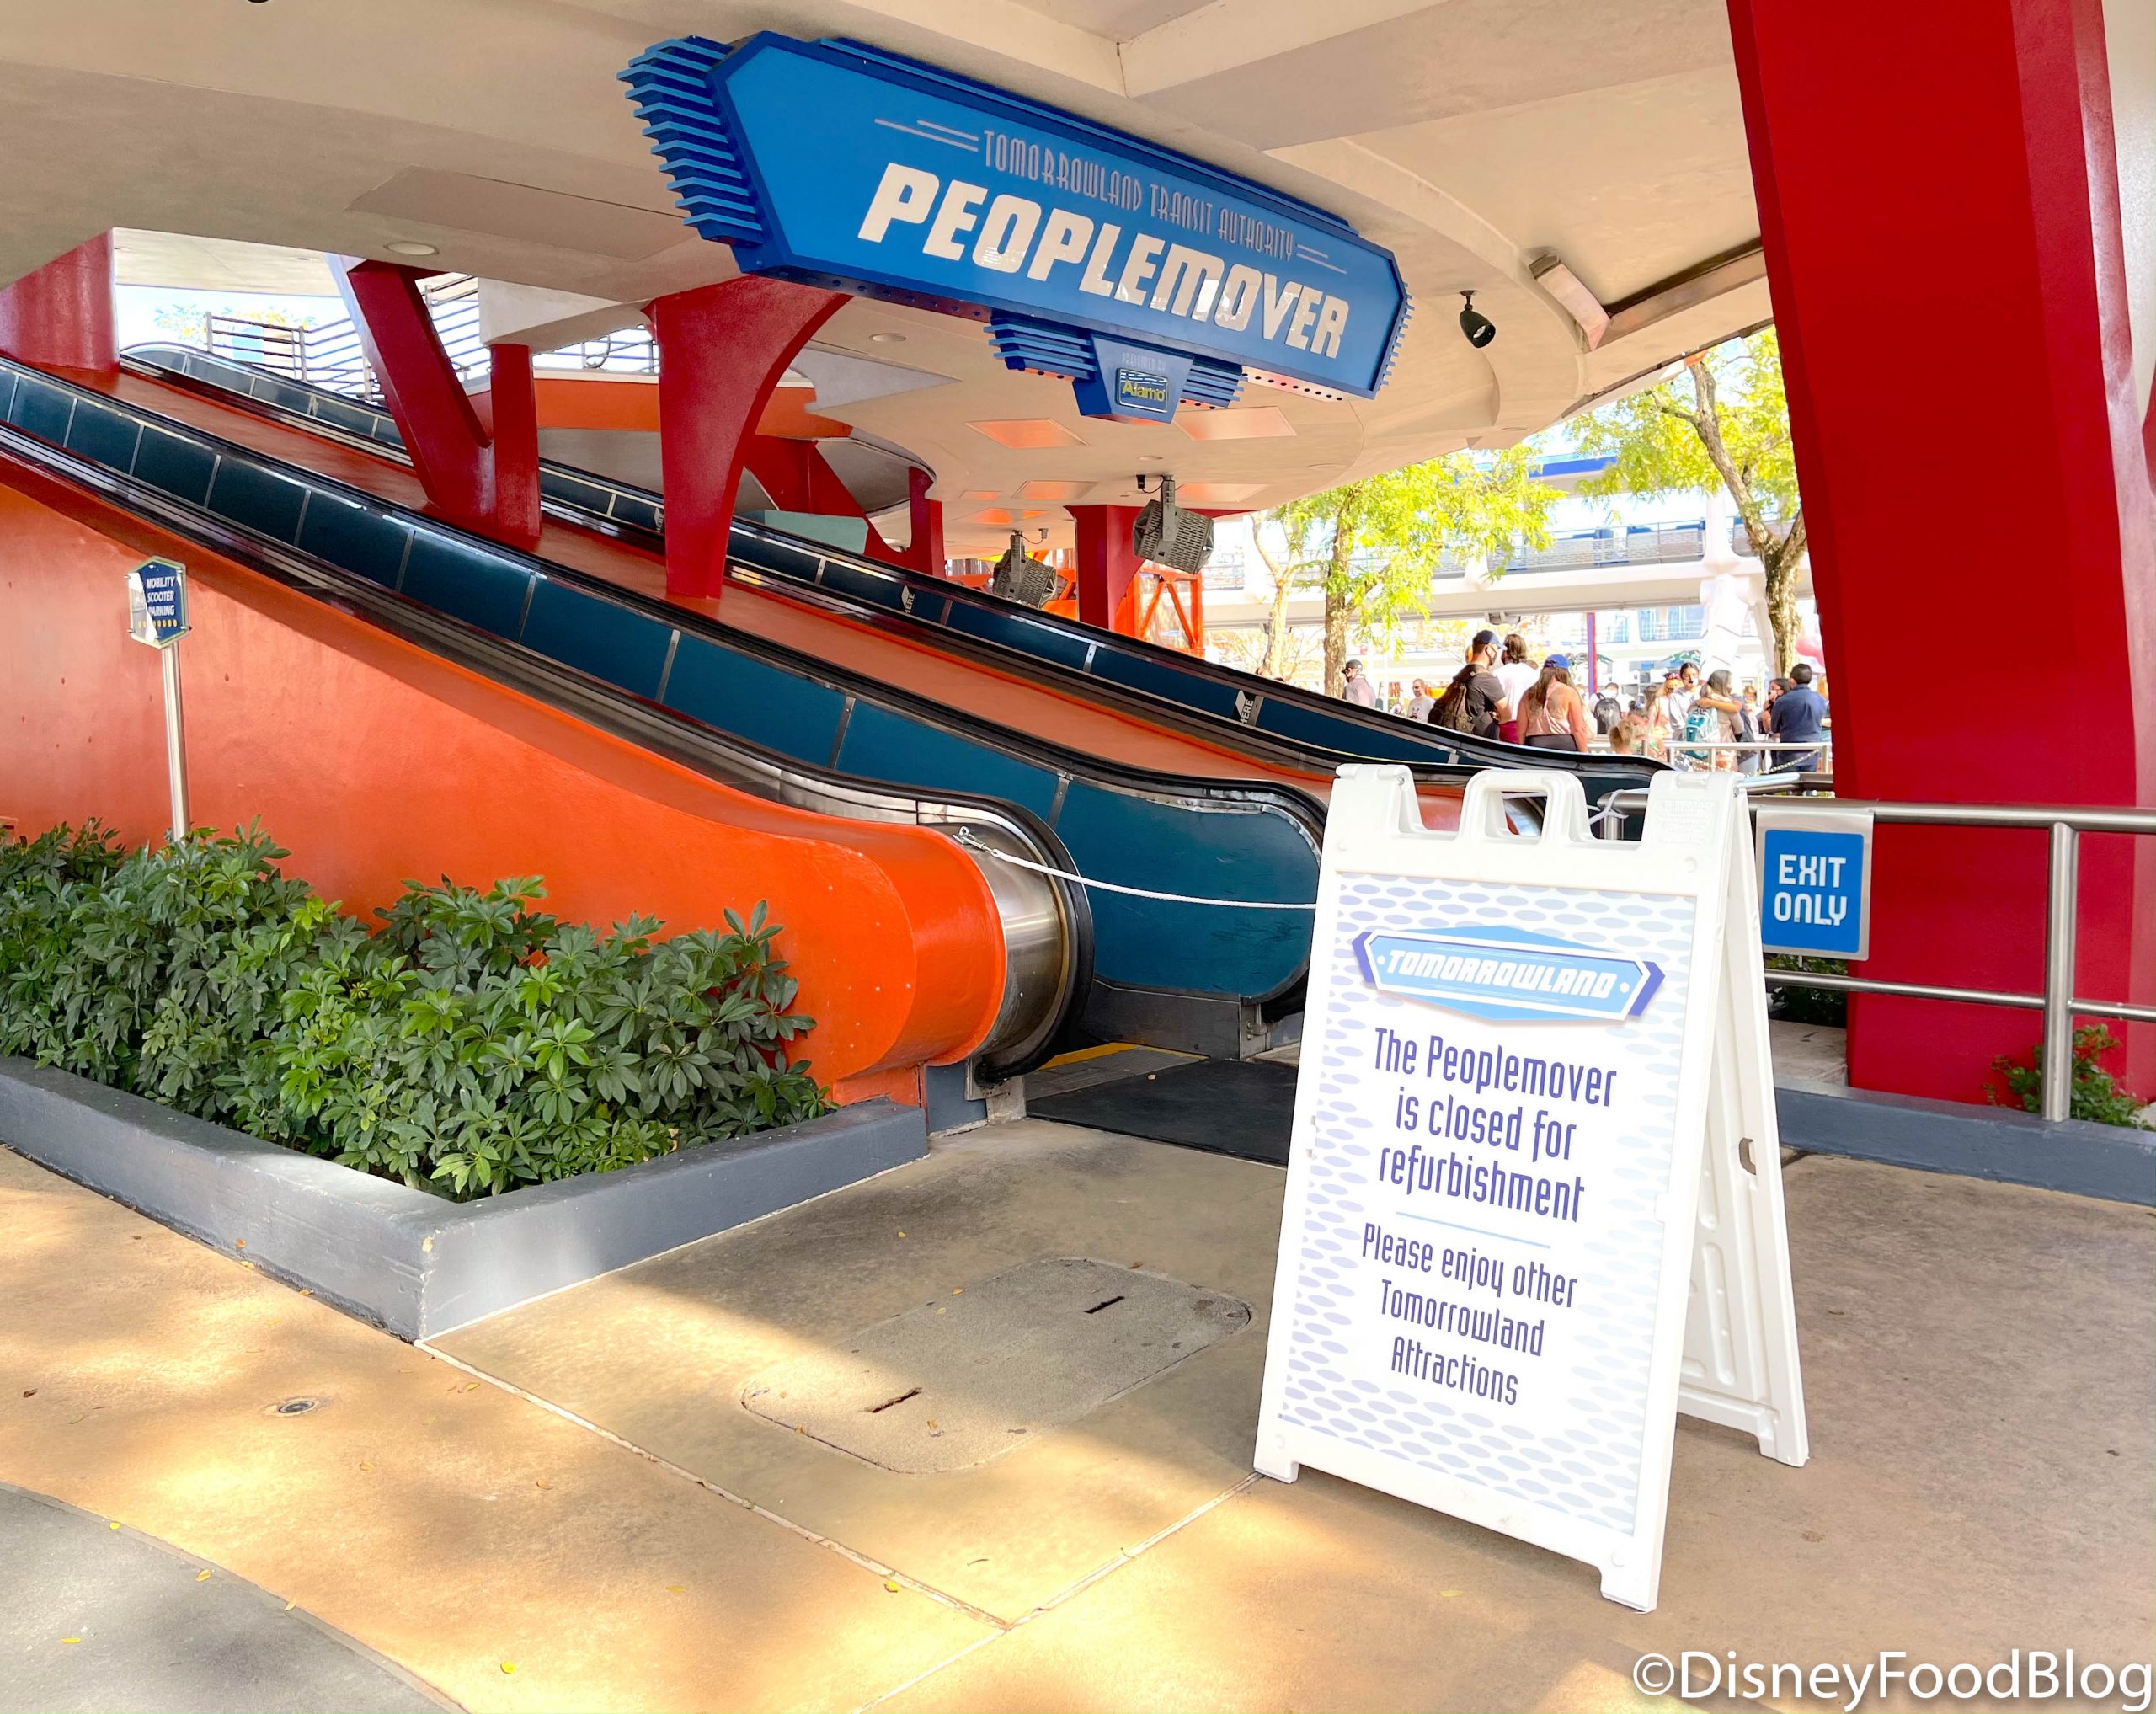 2021 Reopening Wdw Magic Kingdom Peoplemover Closure Scaled 